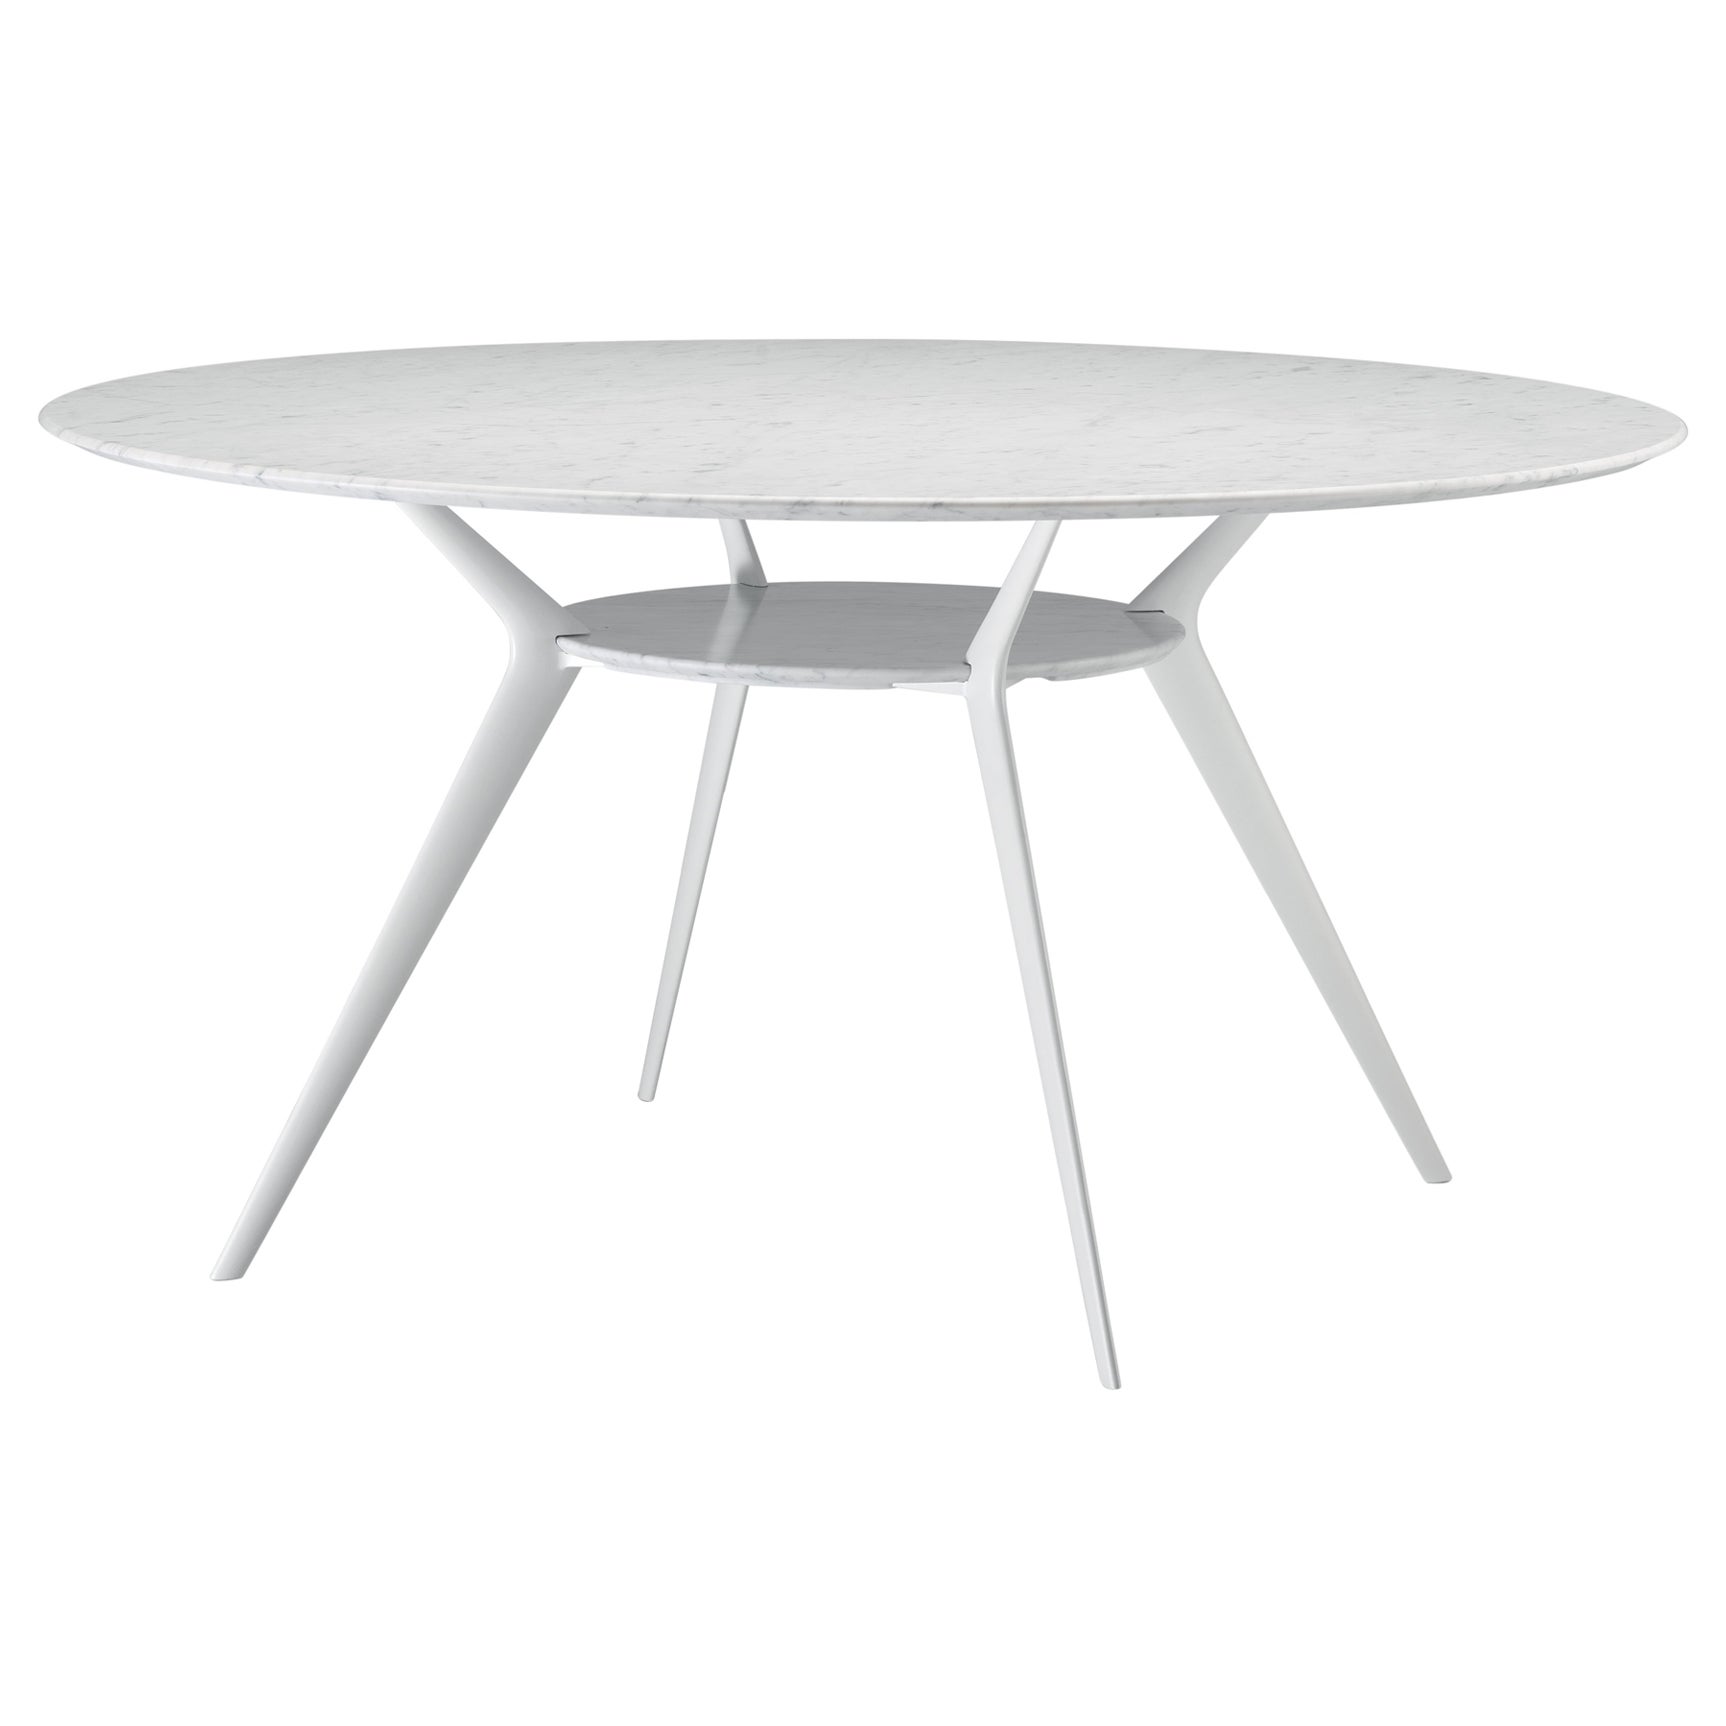 Alias Biplane 403 Table in Marble Top with Light Grey Lacquered Aluminium Frame